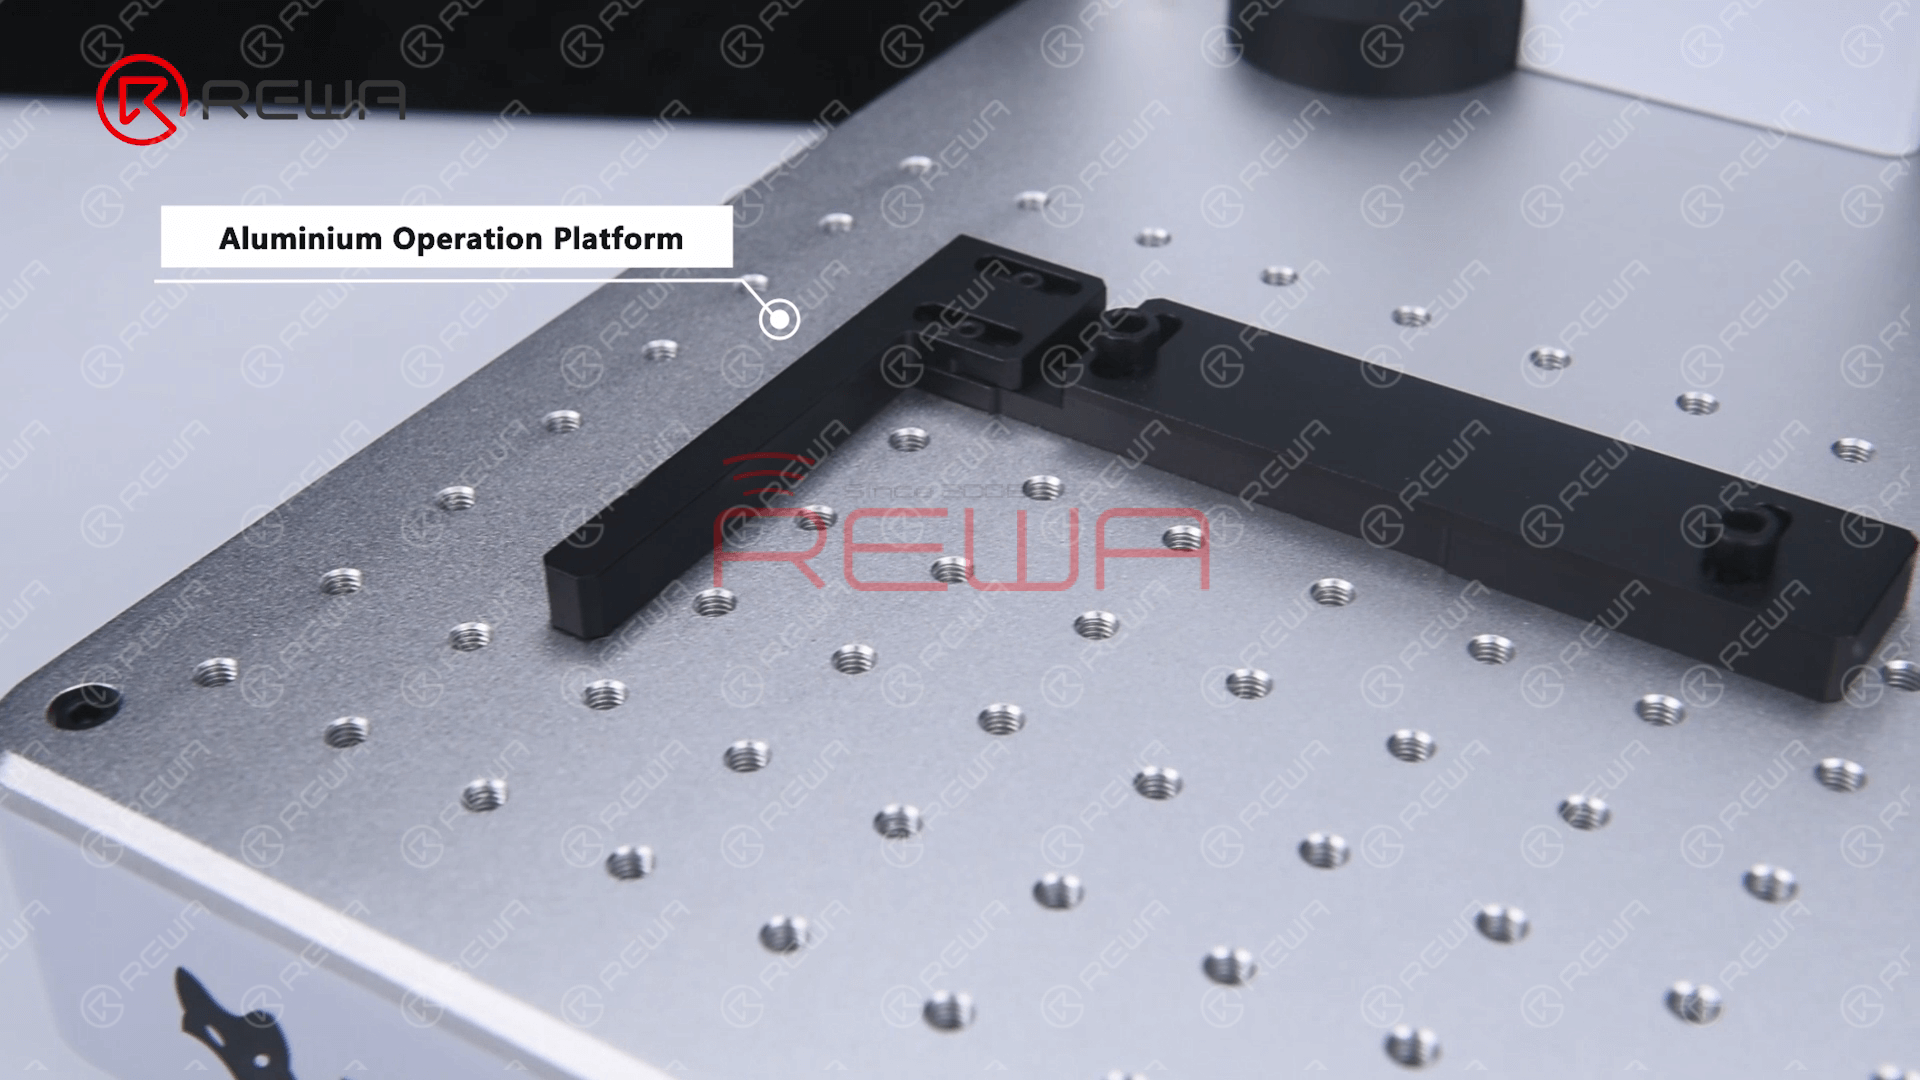 REFOX Upgraded Laser Marking Machine uses an all-aluminum operation platform which is precisely positioned, flexible and adjustable.